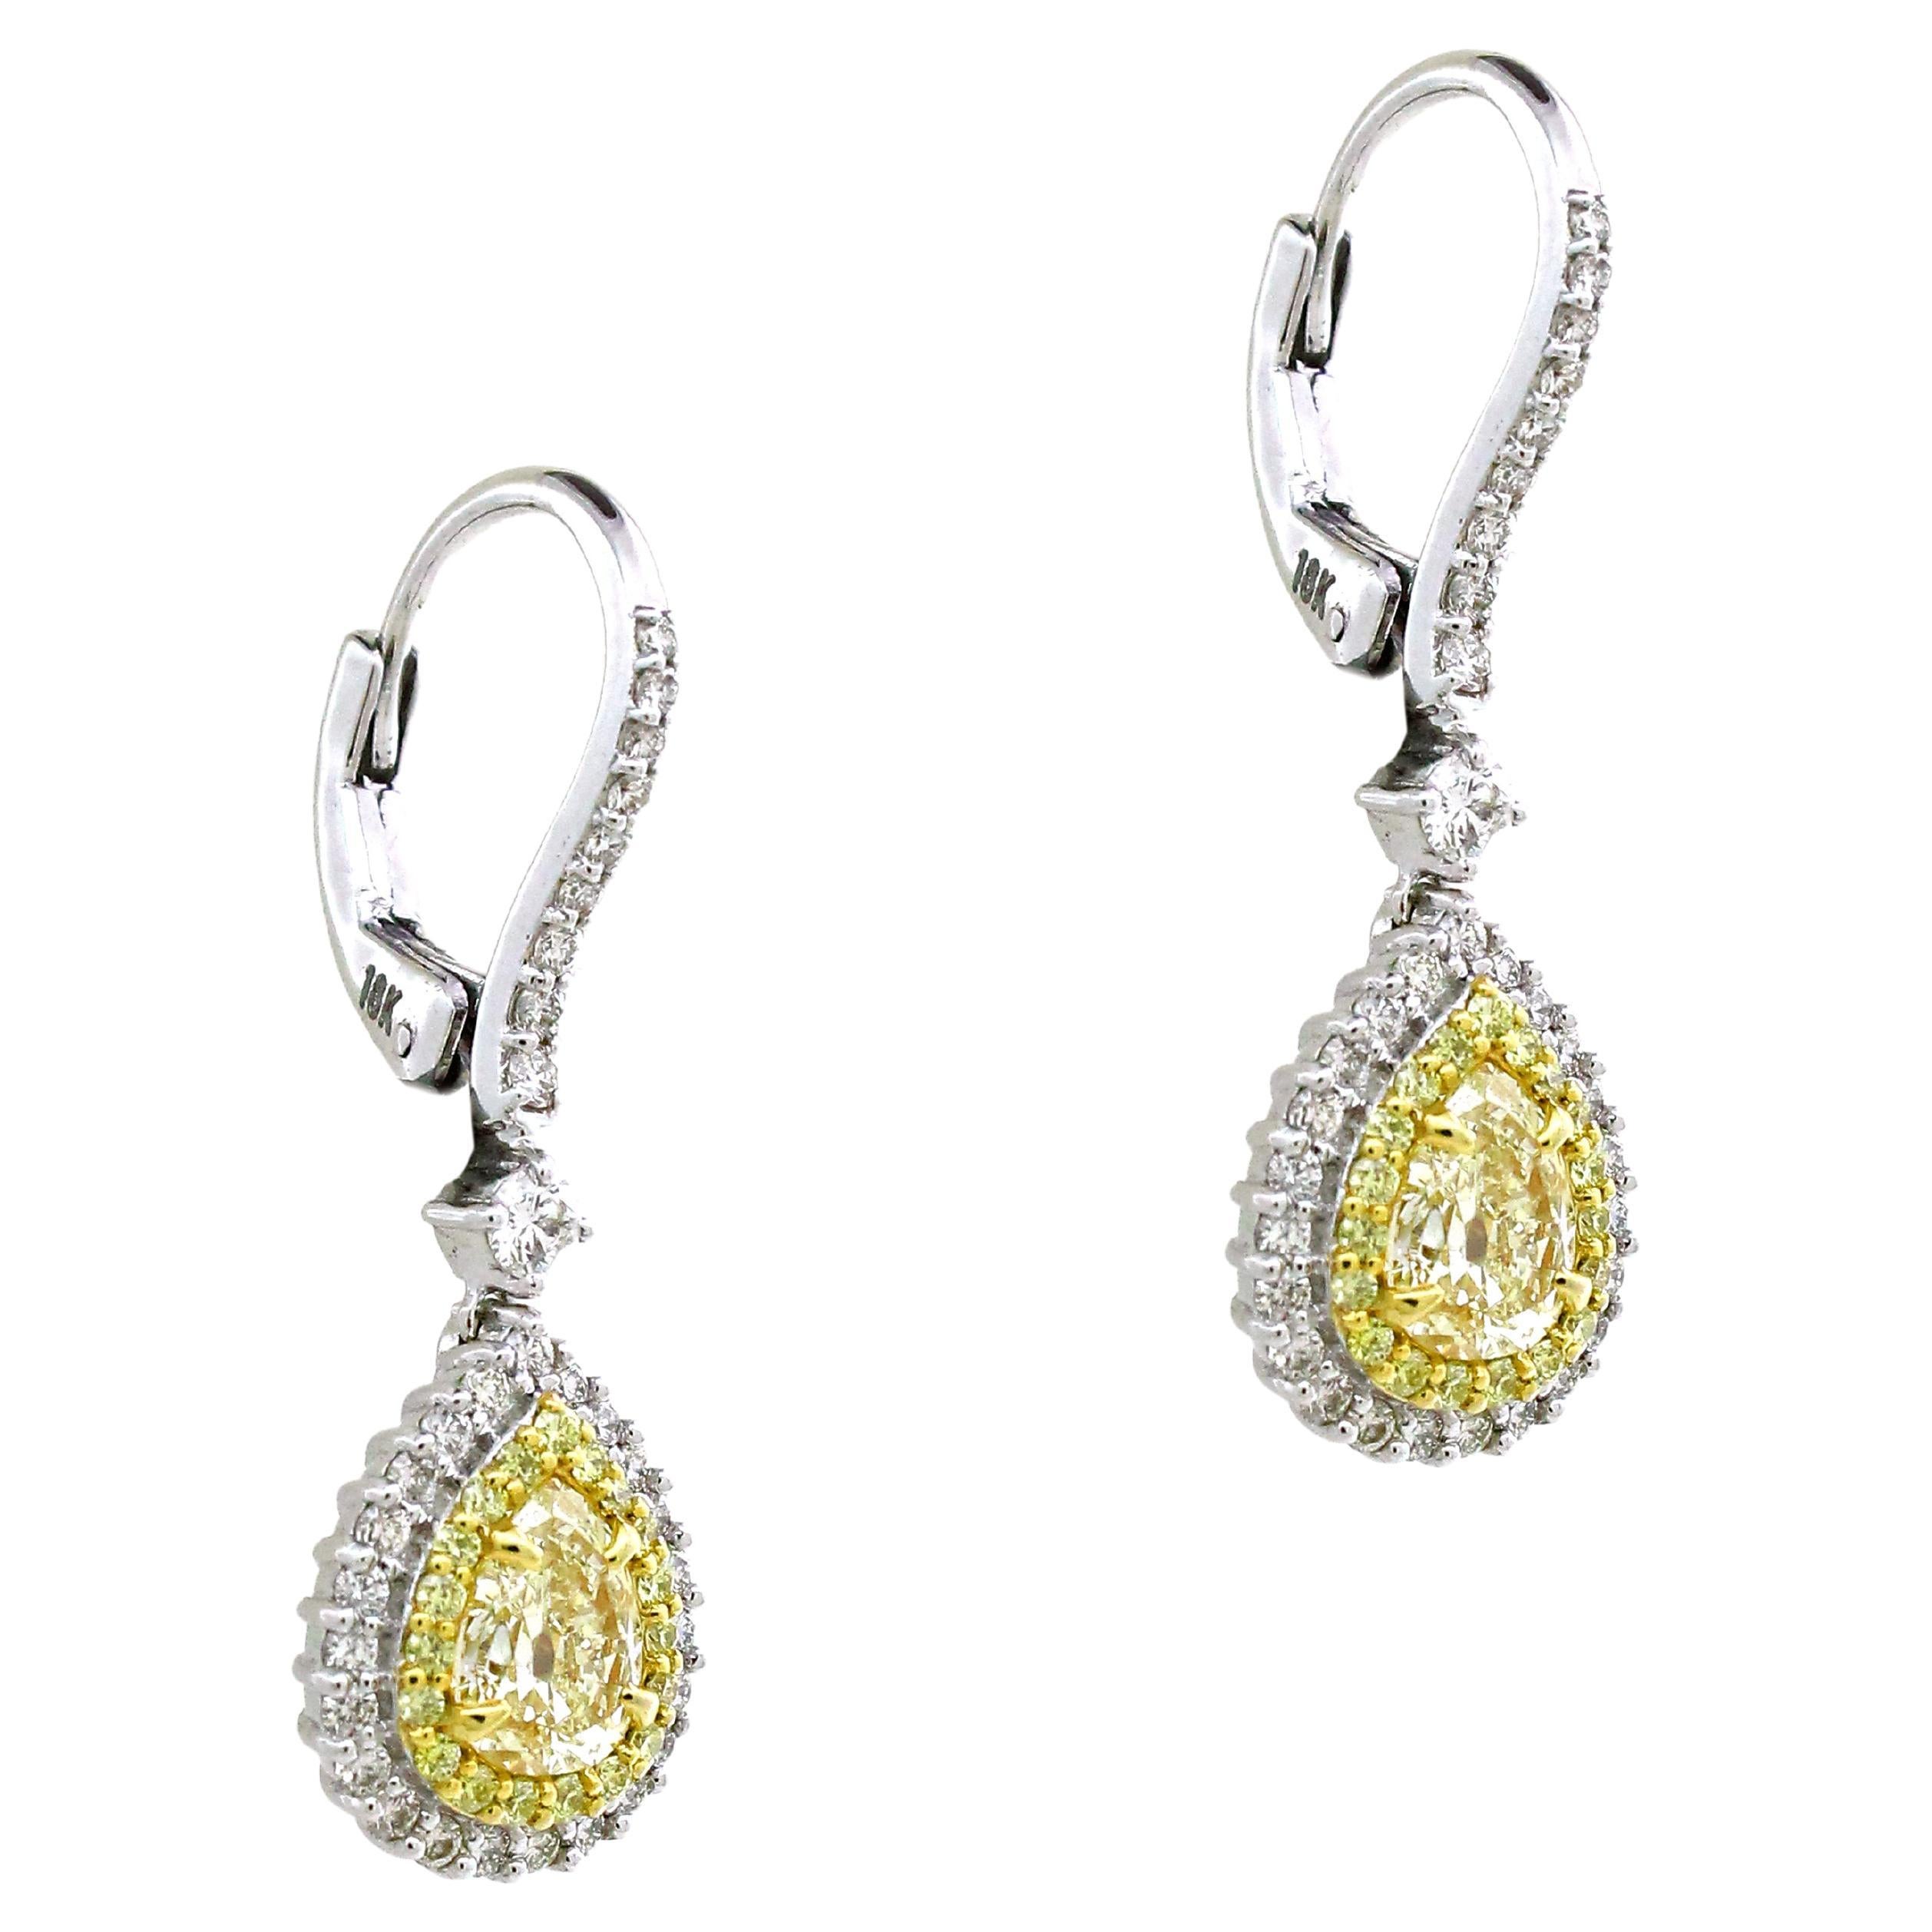 Indulge in opulent luxury with these exquisite earrings that redefine elegance. Adorning your ears, the centerpiece of each earring boasts a luminous yellow pear-cut diamond, weighing a sumptuous 1.3 carats. 
A captivating halo of 39 yellow round